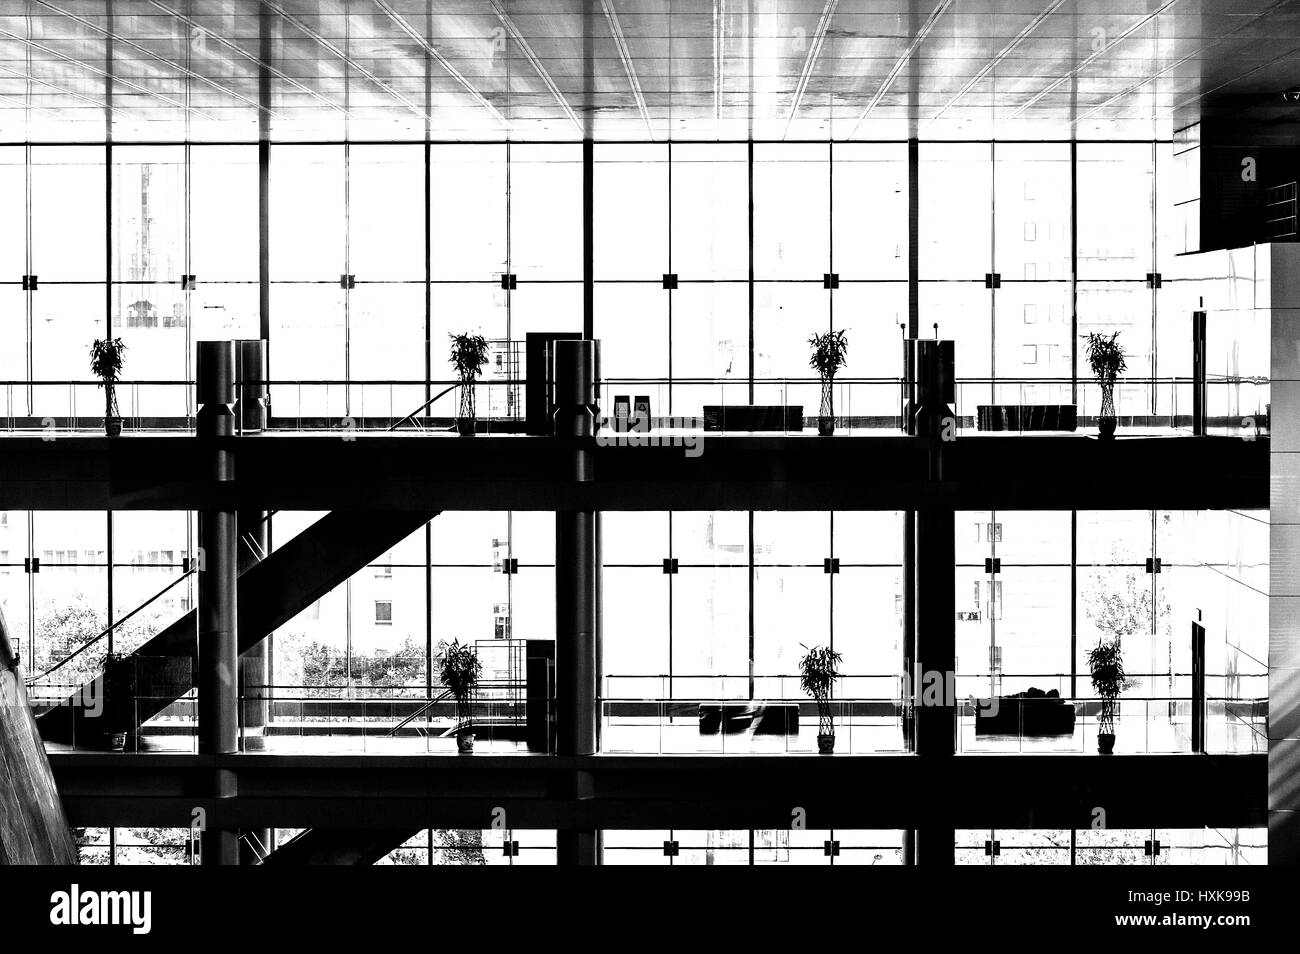 Interior of the building with the glass curtain wall, Beijing Stock Photo